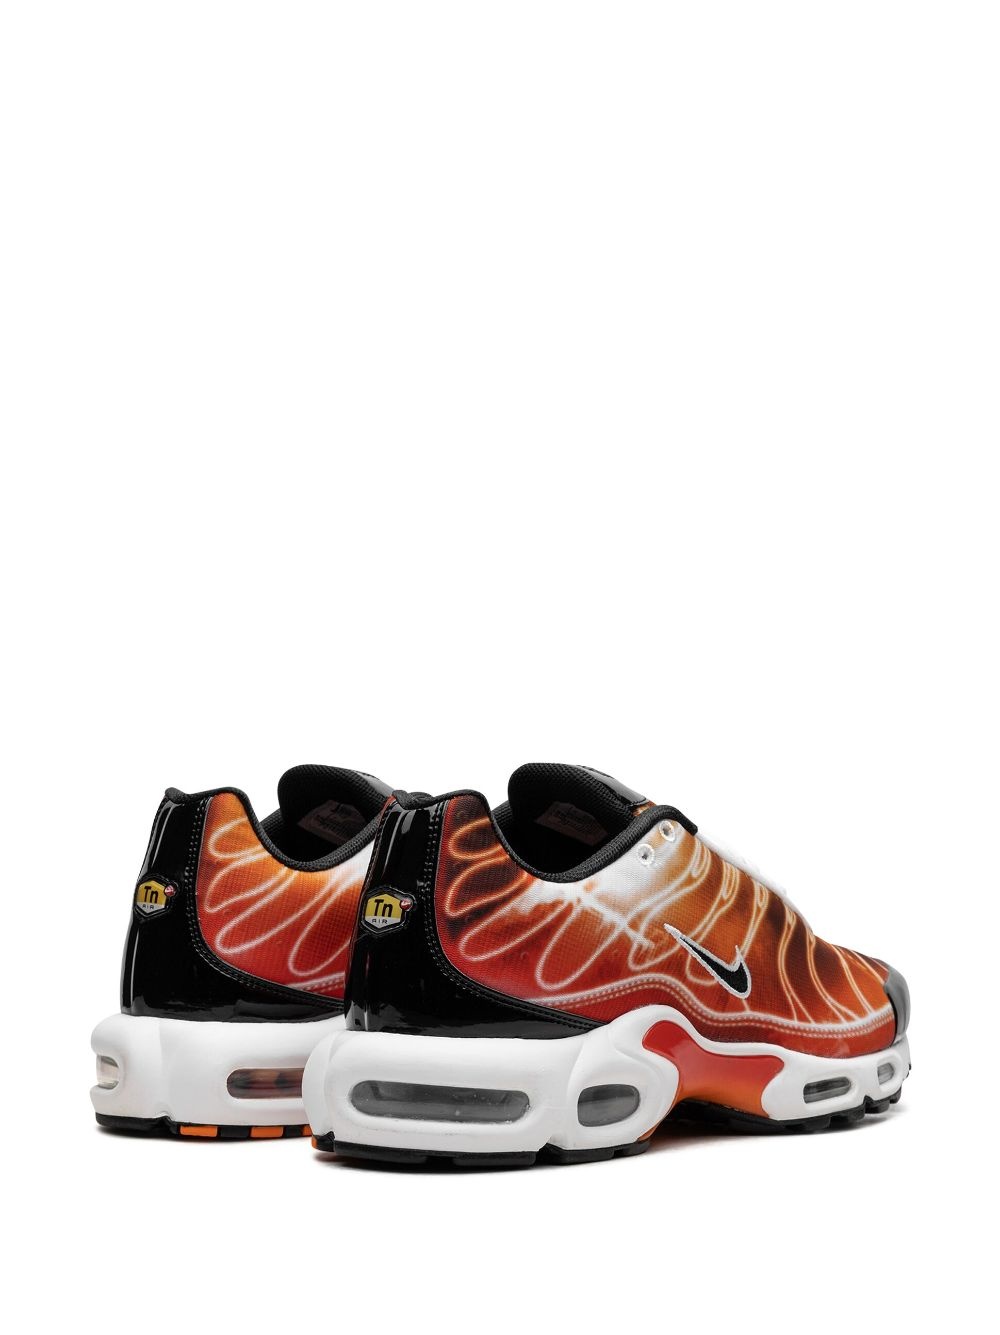 Air Max Plus "Light Photography - Sport Red" sneakers - 3